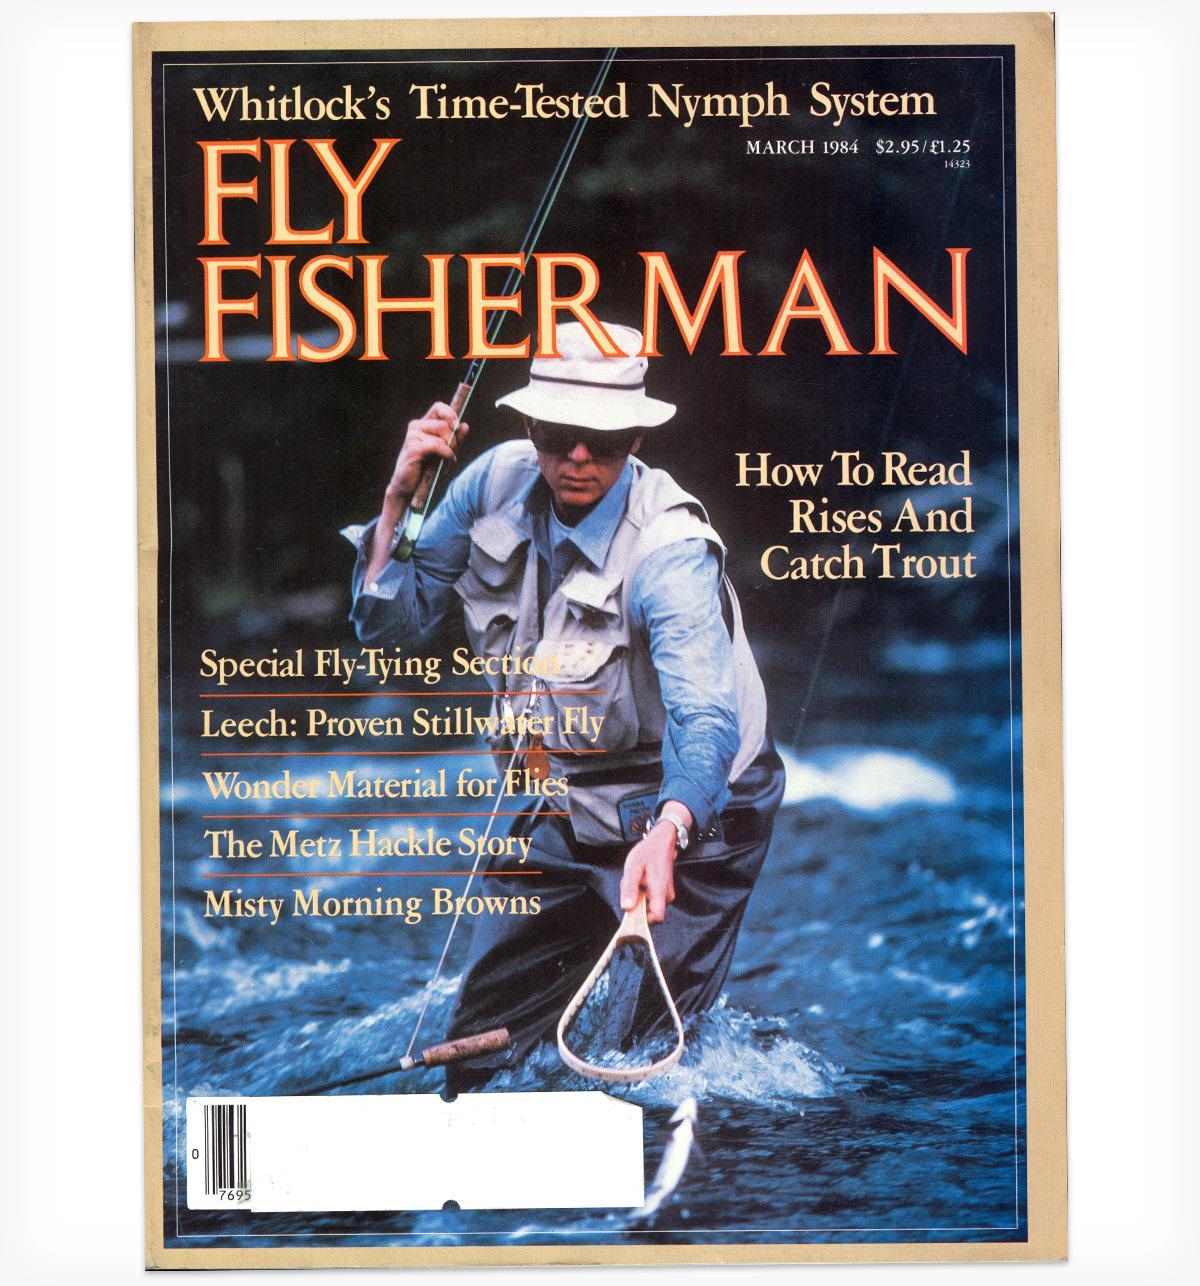 Fly Fisherman Throwback: The Whitlock Nymphing System-Part I - Fly